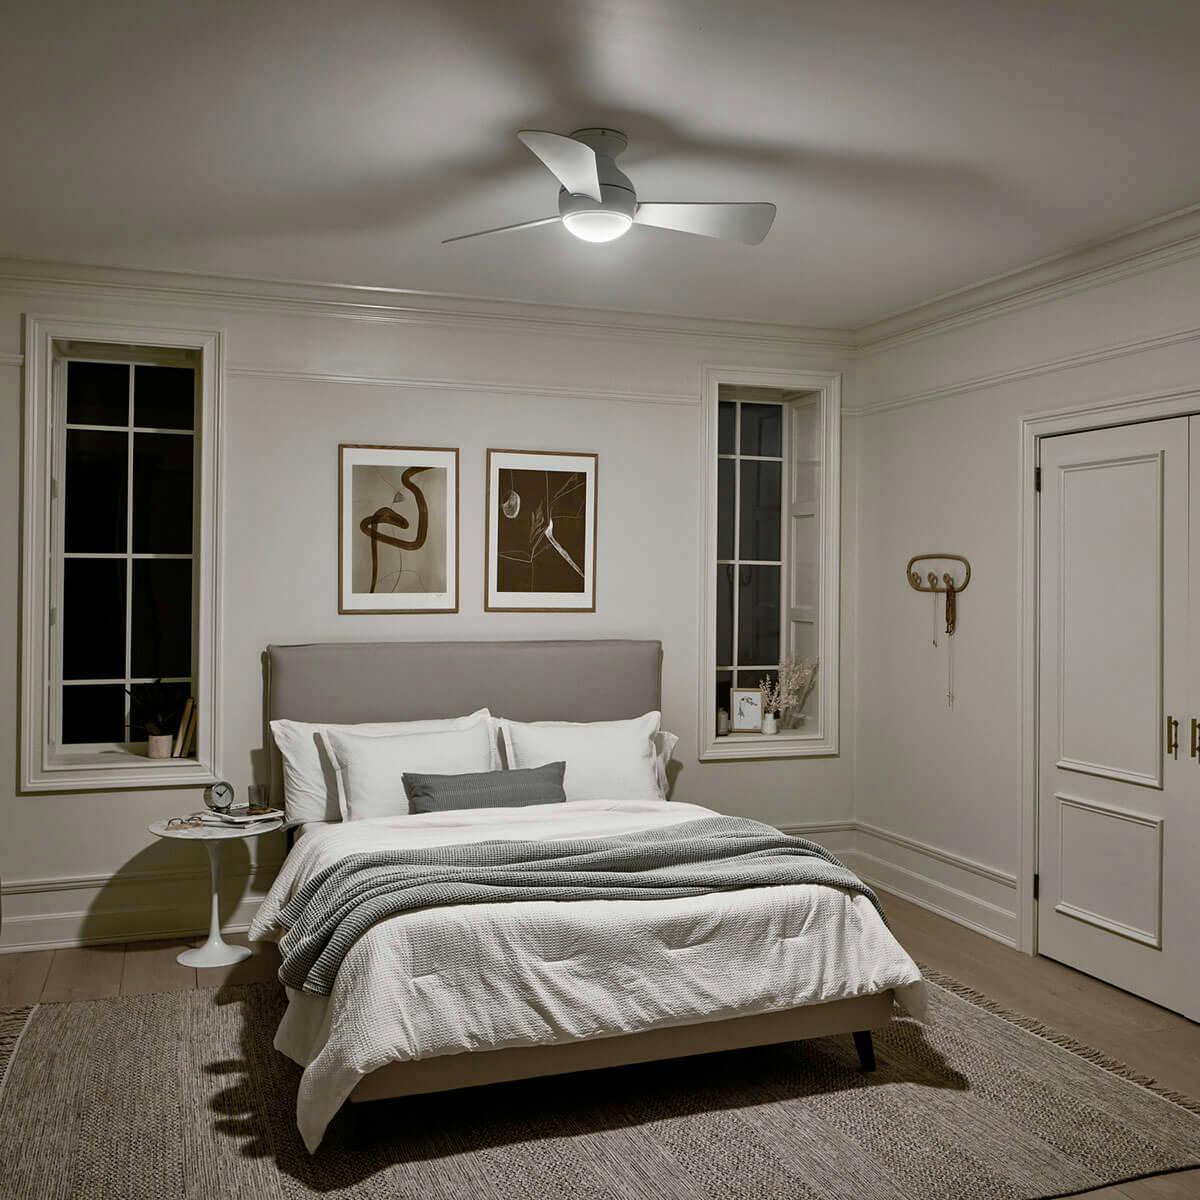 Night timebedroom image featuring Sola 330151MWH